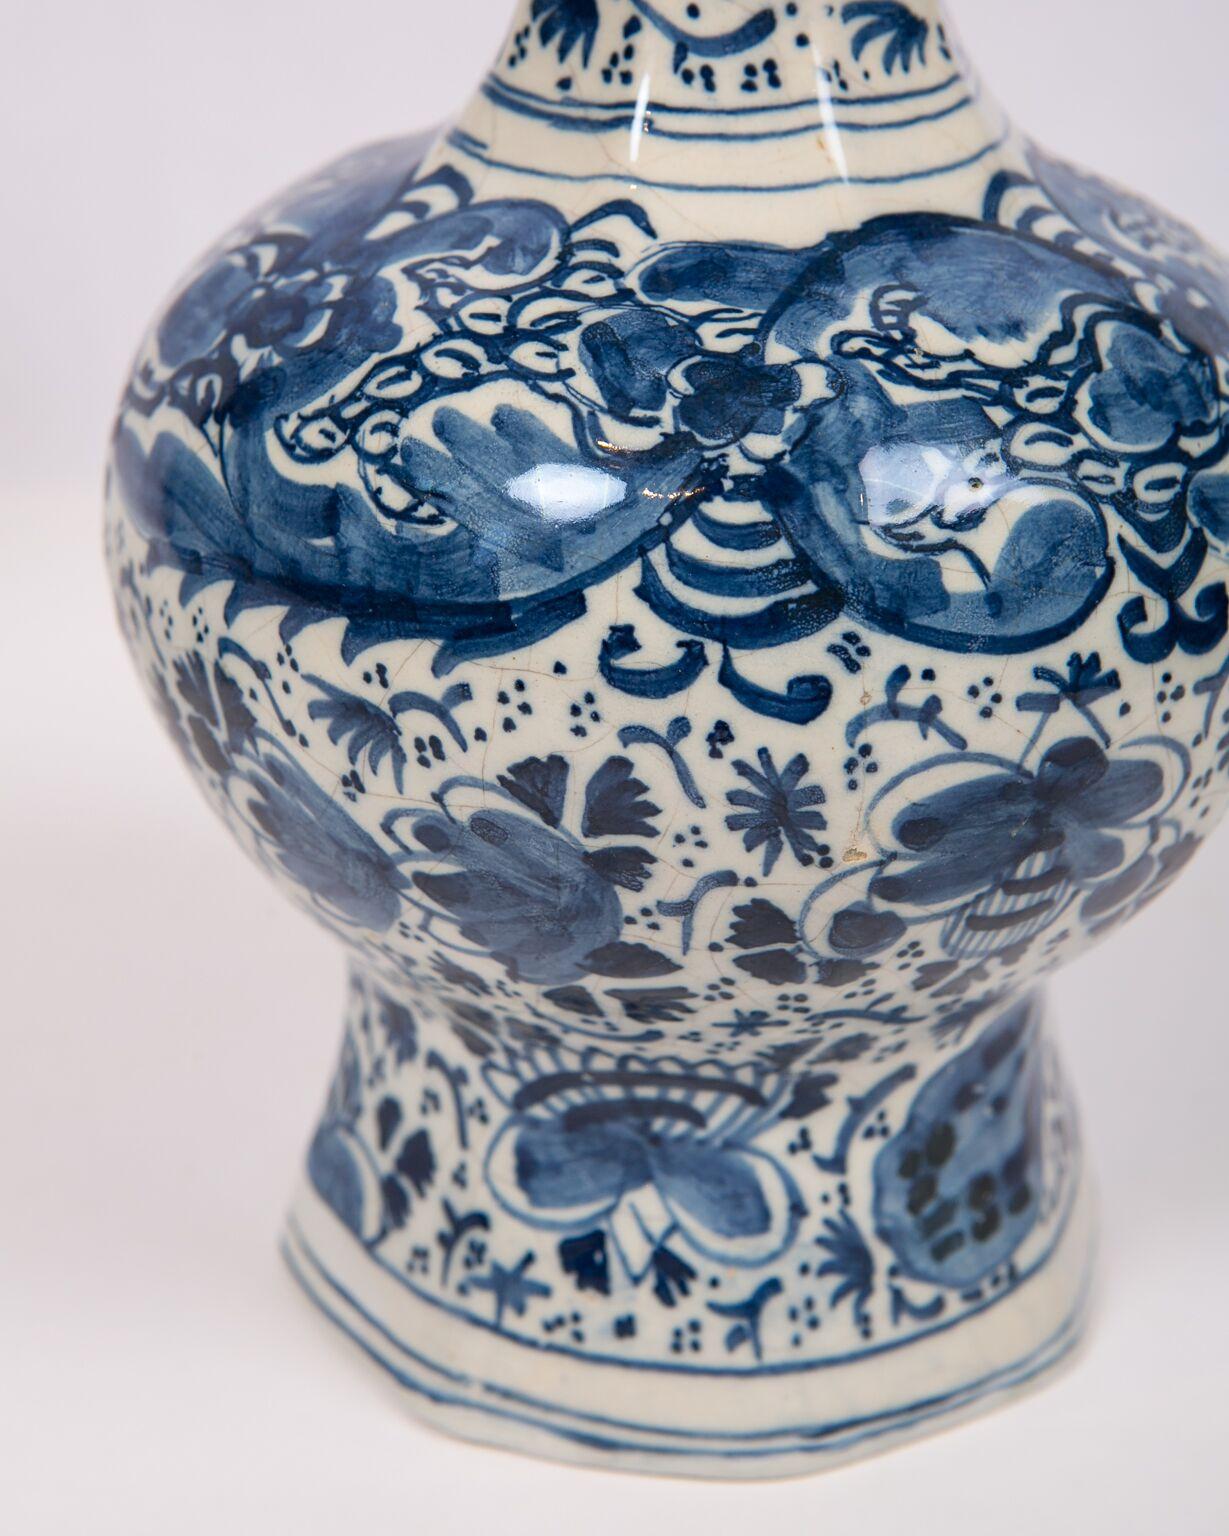 Pair of Blue and White Delft Vases Showing Peacocks and Flowers, 18th Century 3